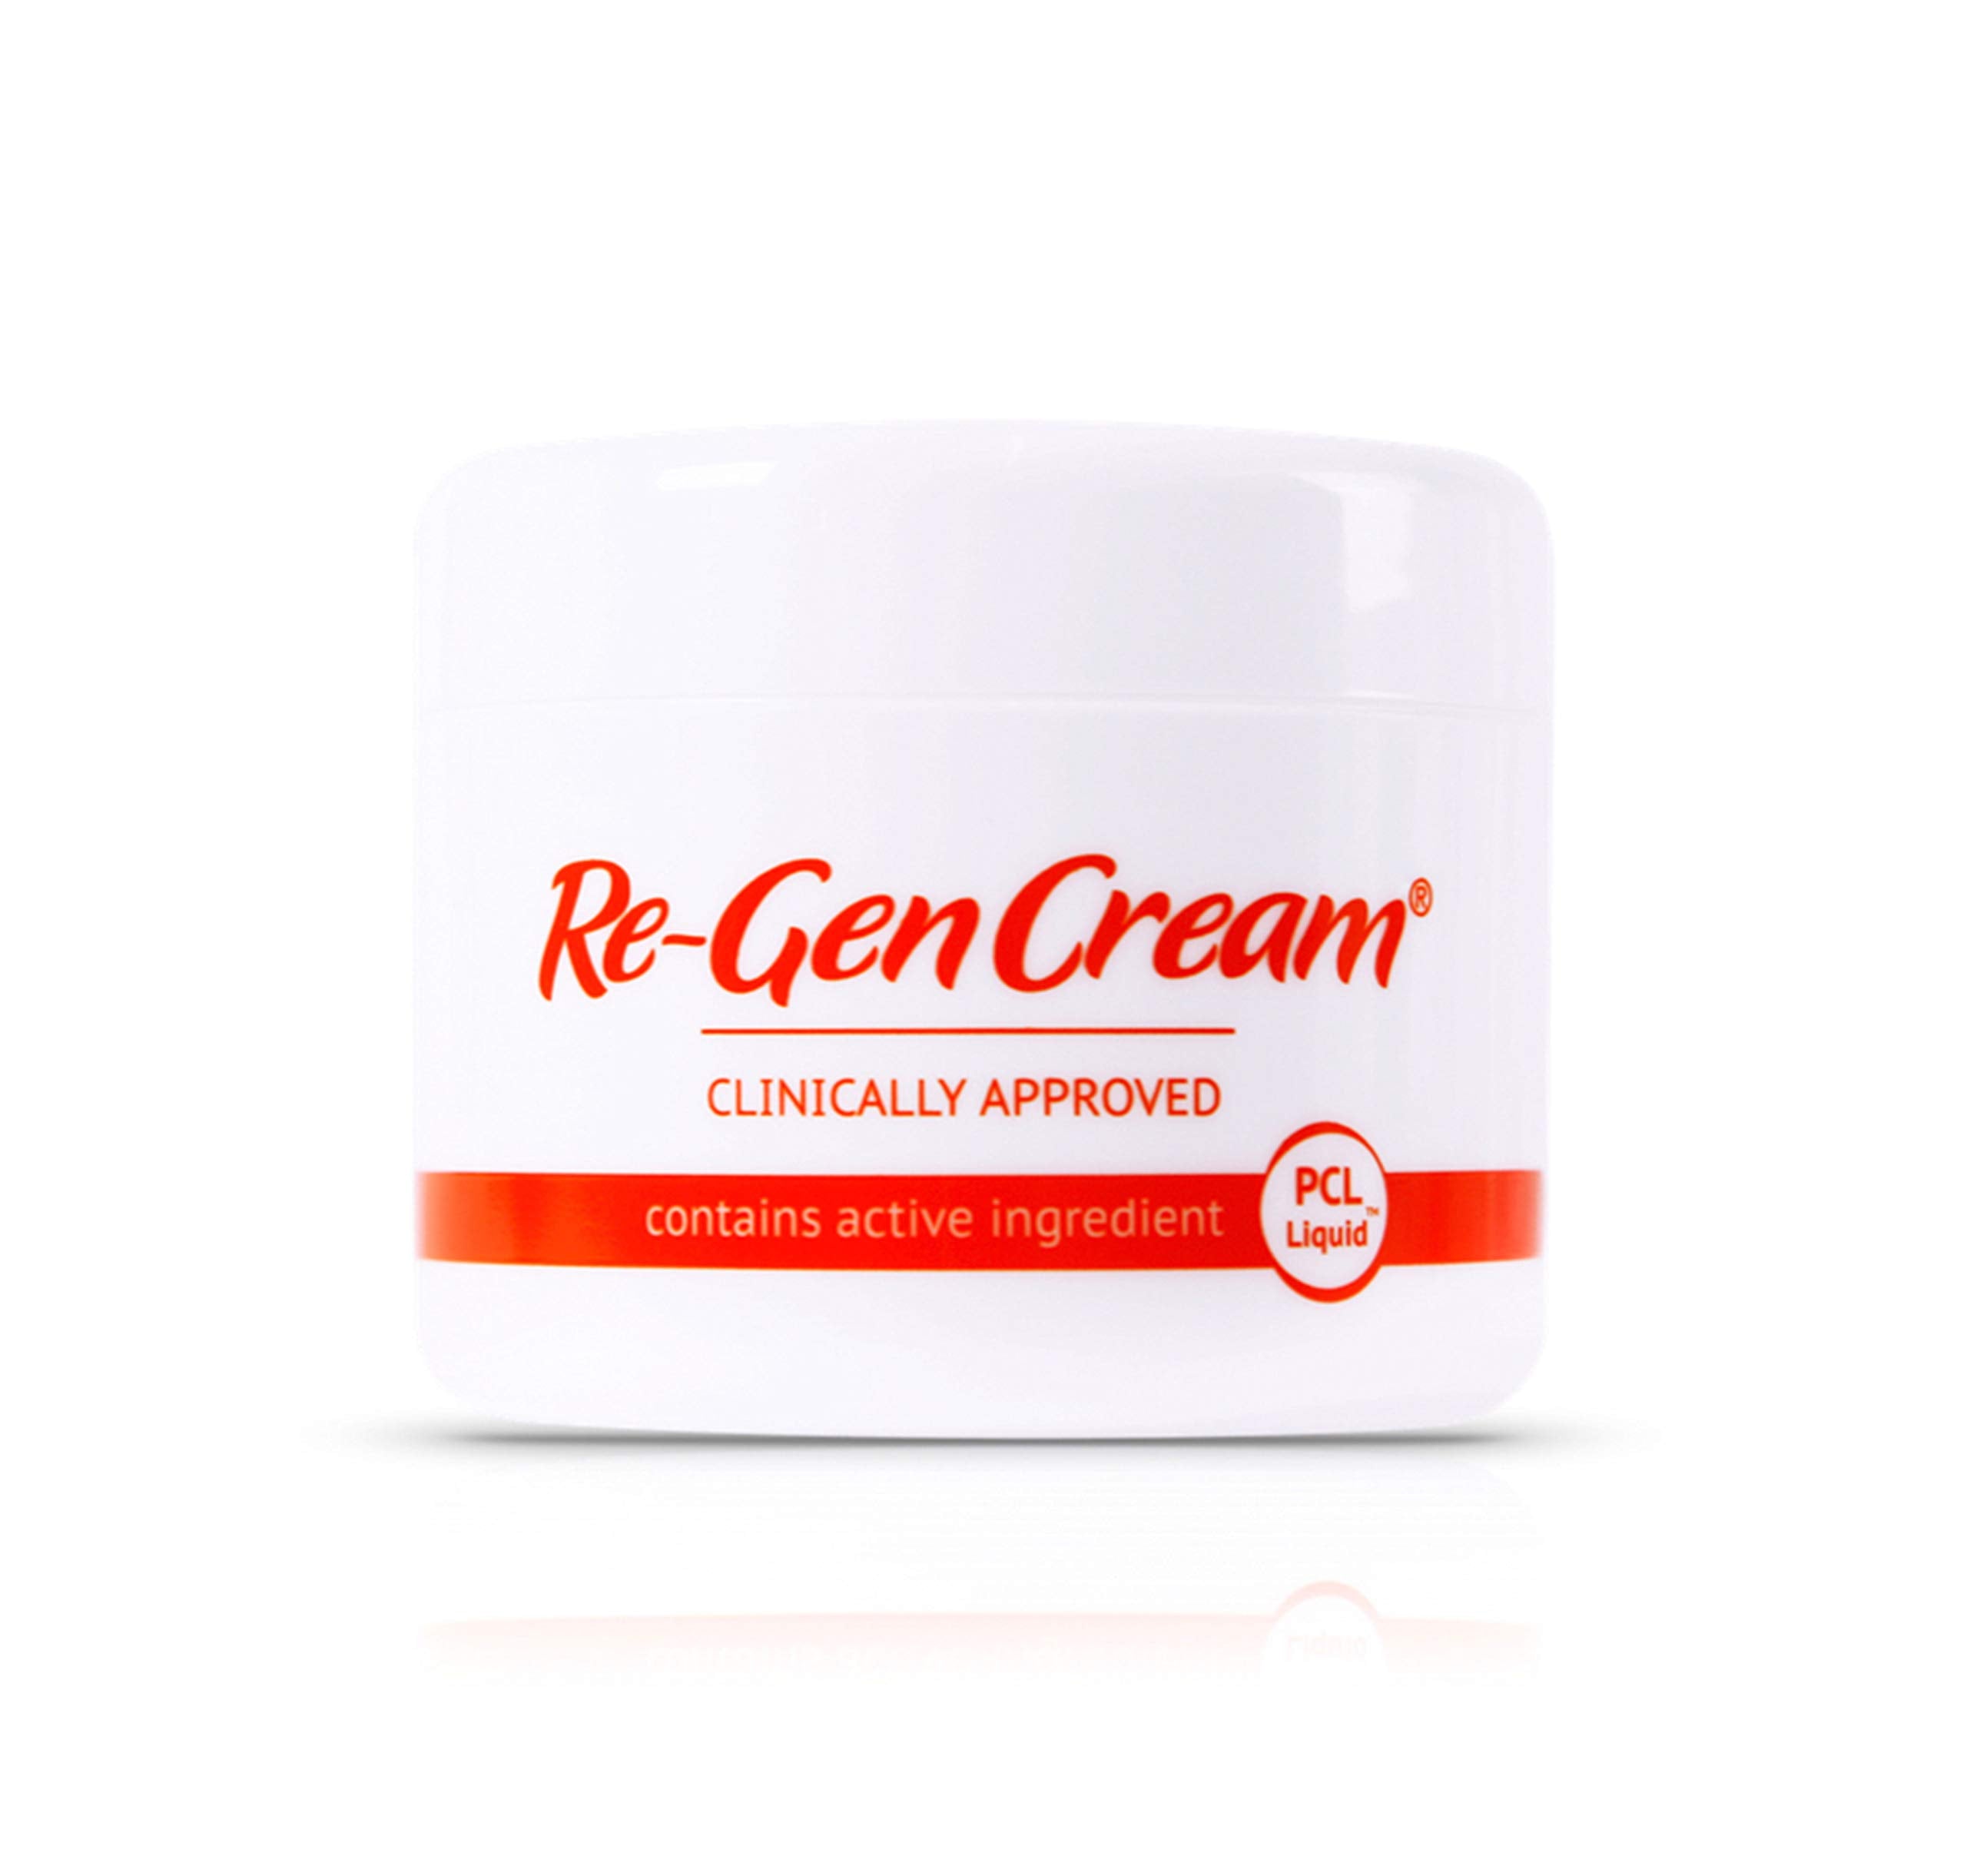 Re-Gen Cream - Face and Body Moisturiser - Improve the Appearance of Scars, Stretch Marks and Uneven Skin Tone - 1 x 125 ml